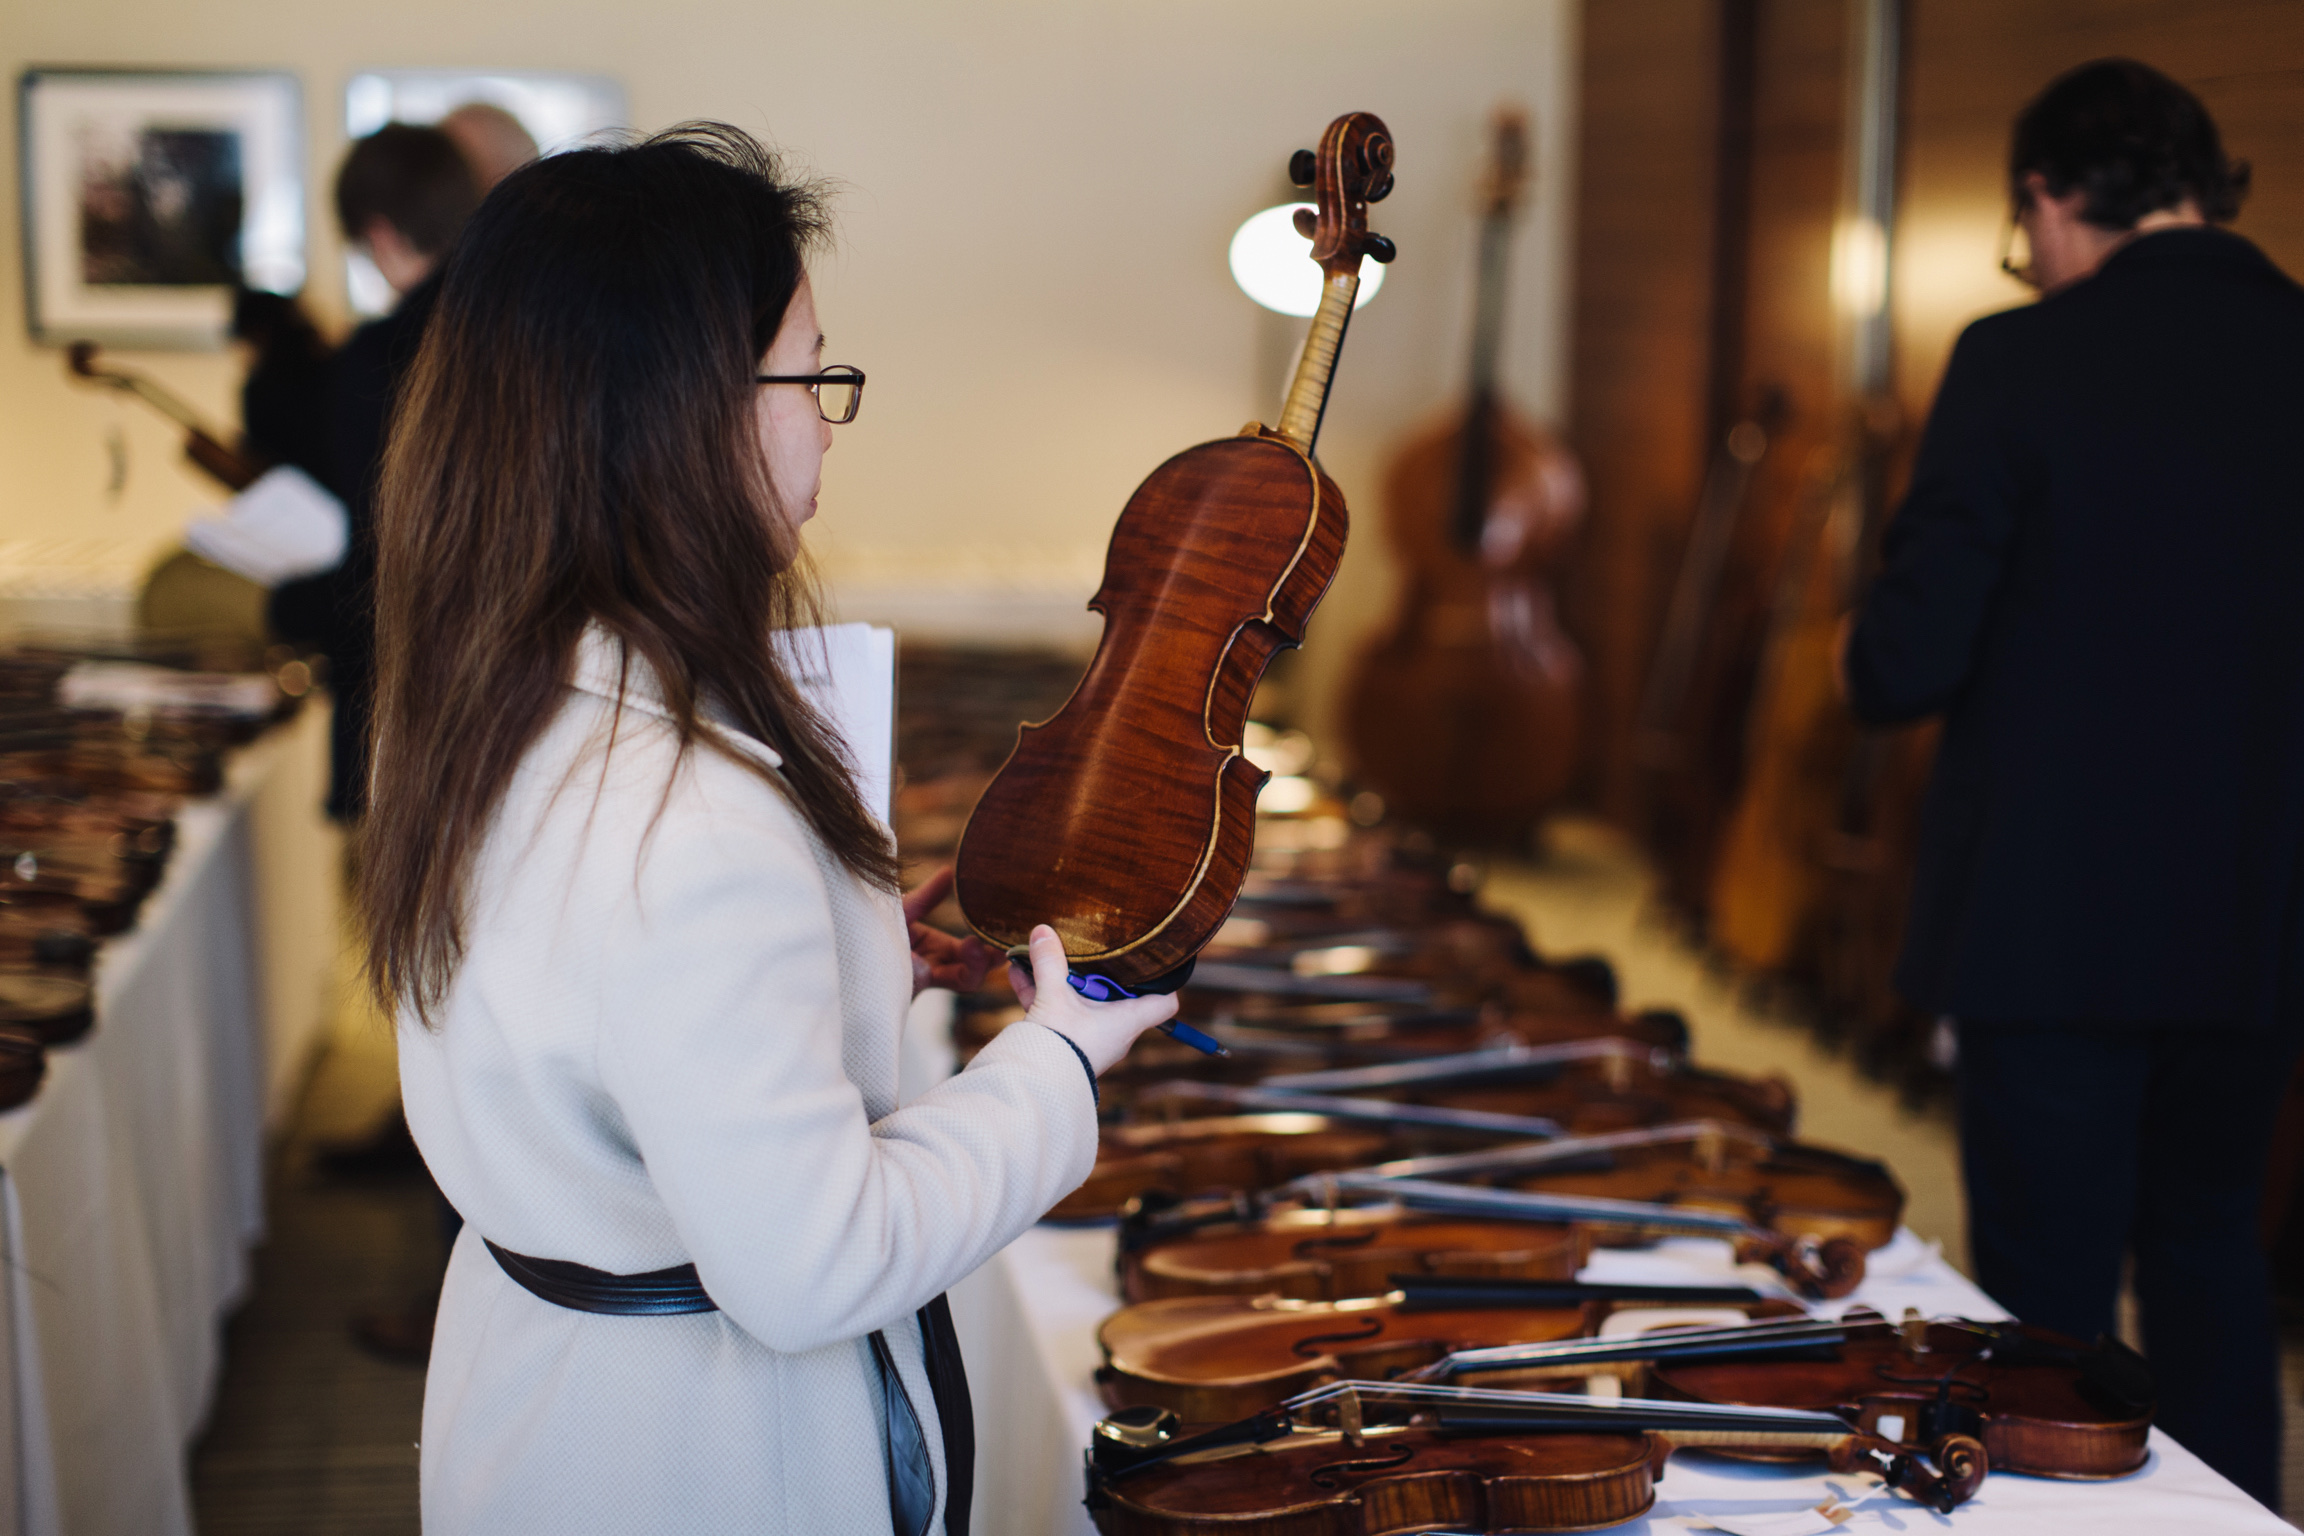 Buying a violin at auction: advice for novices